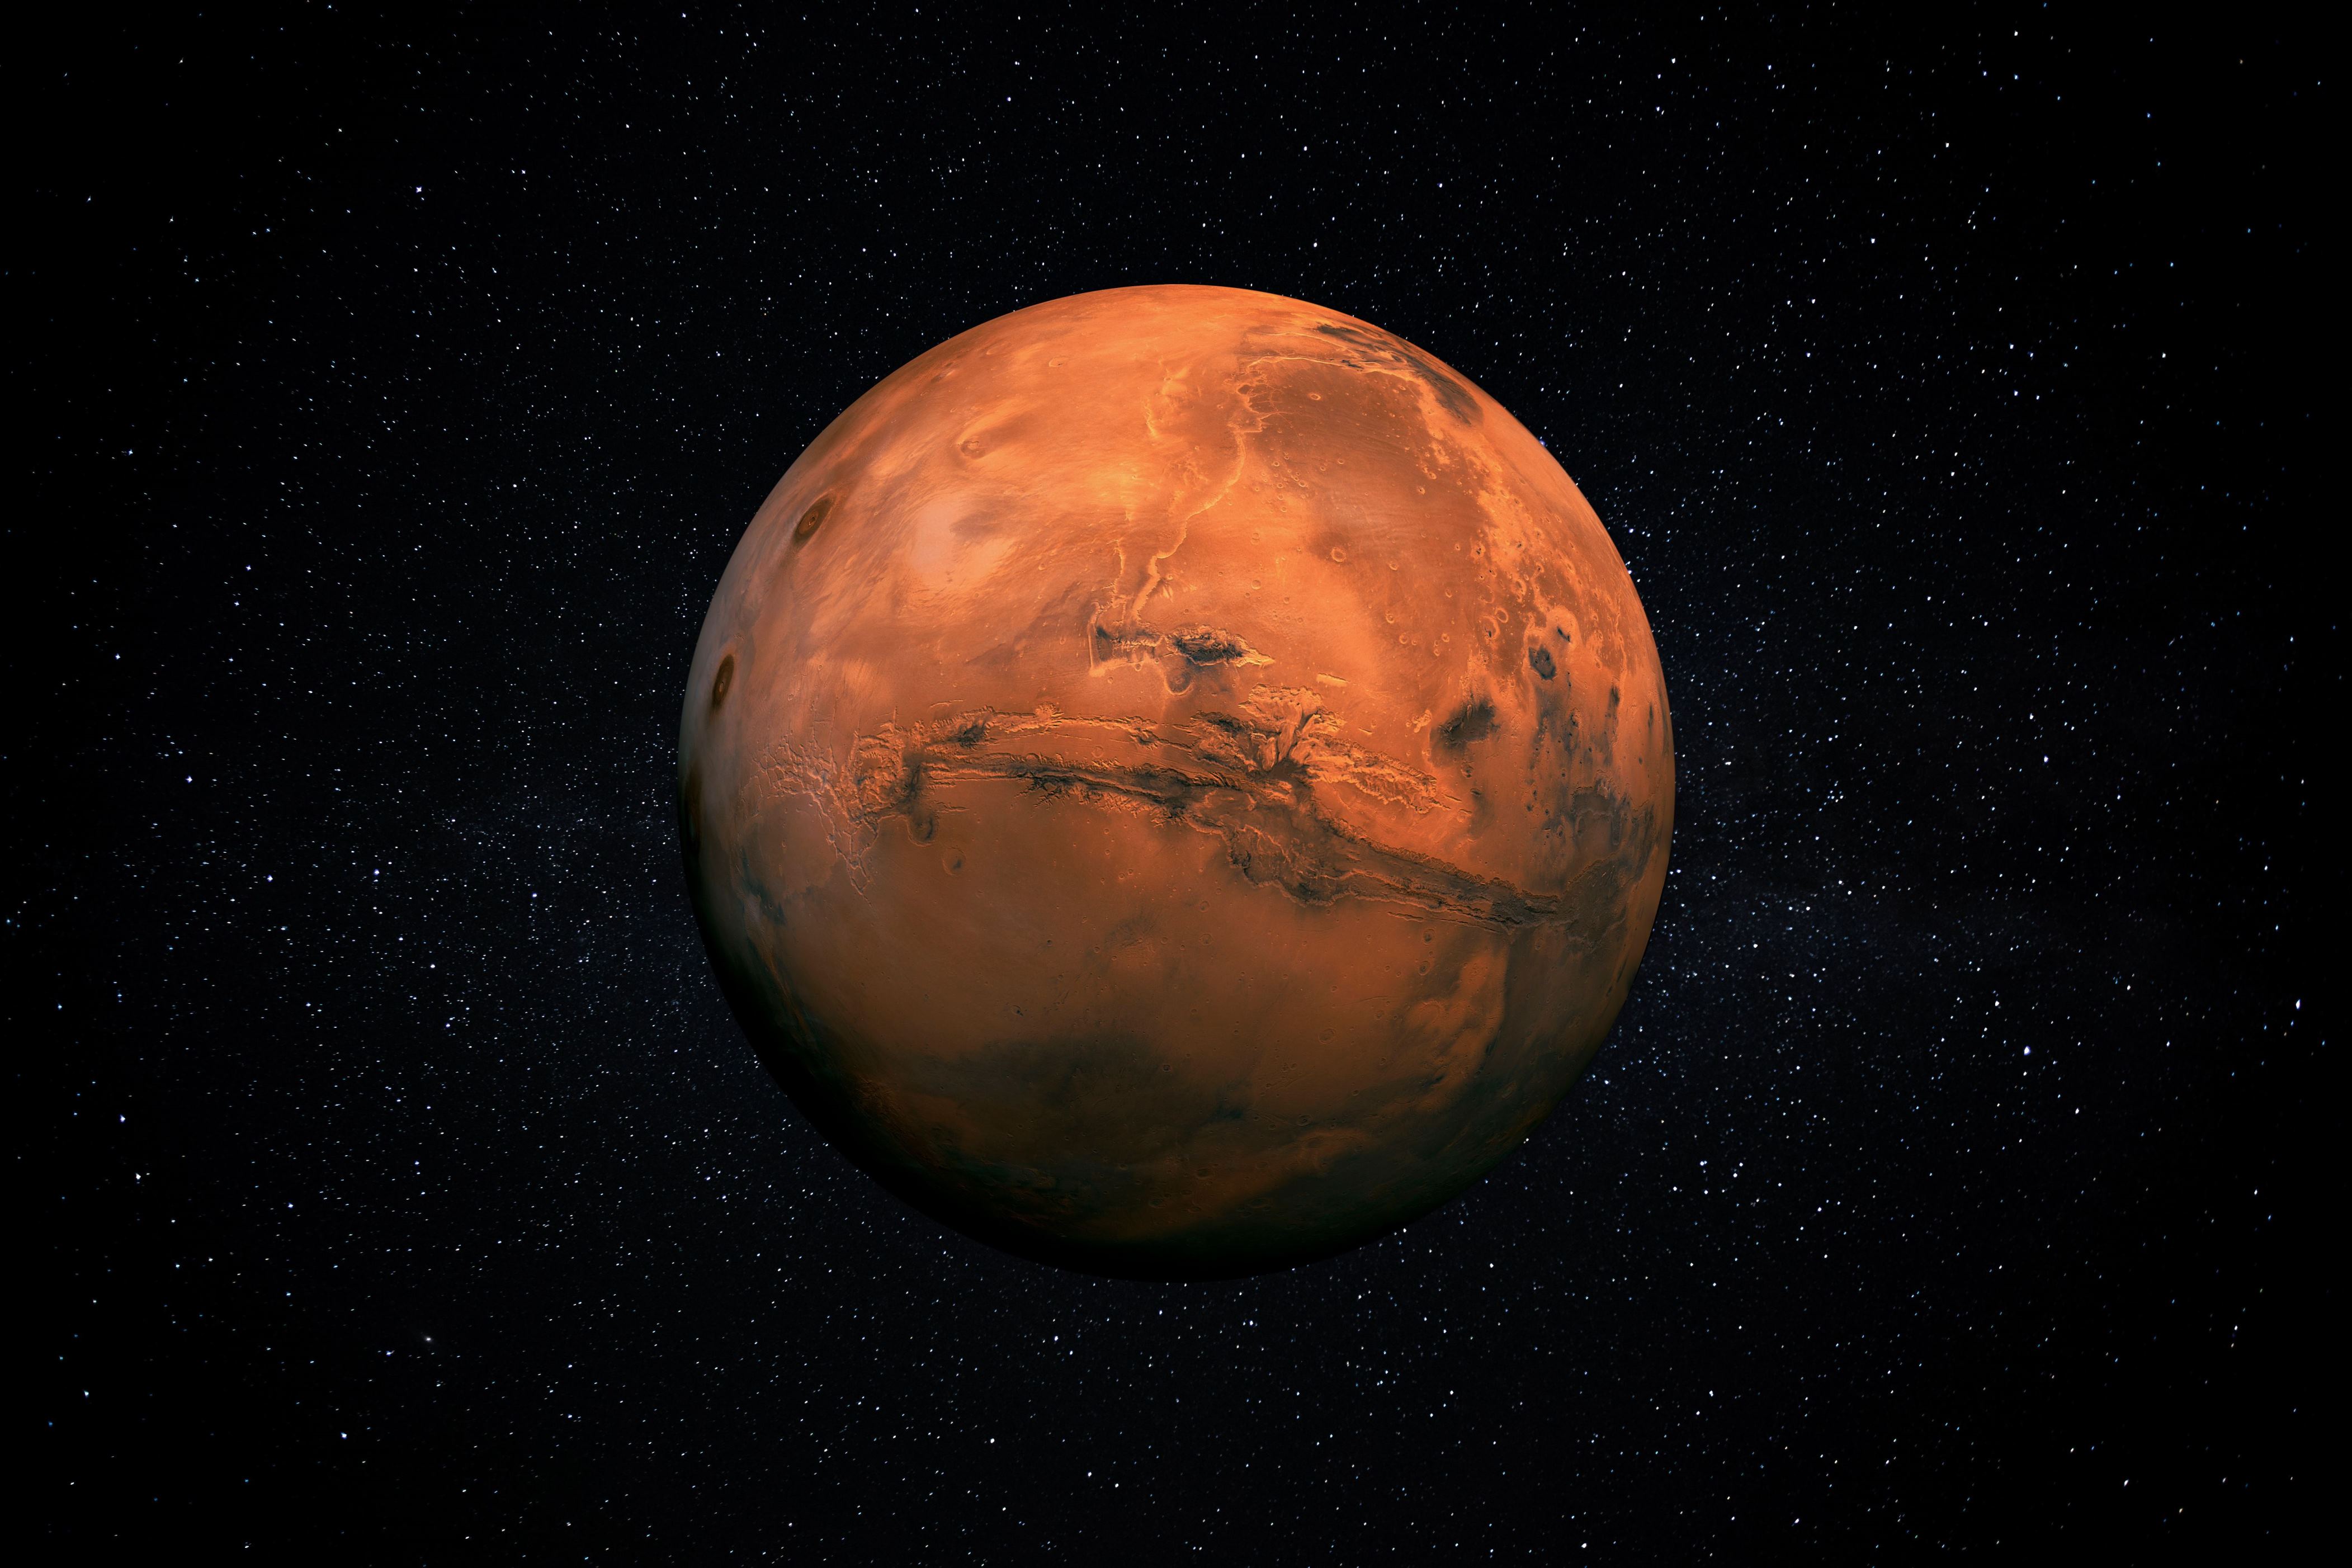 <p class="MsoNormal">While Mercury has no atmosphere to speak of, Mars has a thin atmosphere, although it’s not enough to support the existence of water on the planet. At the same time, people who have studied the planet’s surface have observed patterns that are most likely due to the presence of water at some point. Scientists believe that Mars <a href="https://www.universetoday.com/33415/interesting-facts-about-the-planets/">gradually lost atmosphere</a> to the force of the sun’s energy over the course of millions of years.</p>